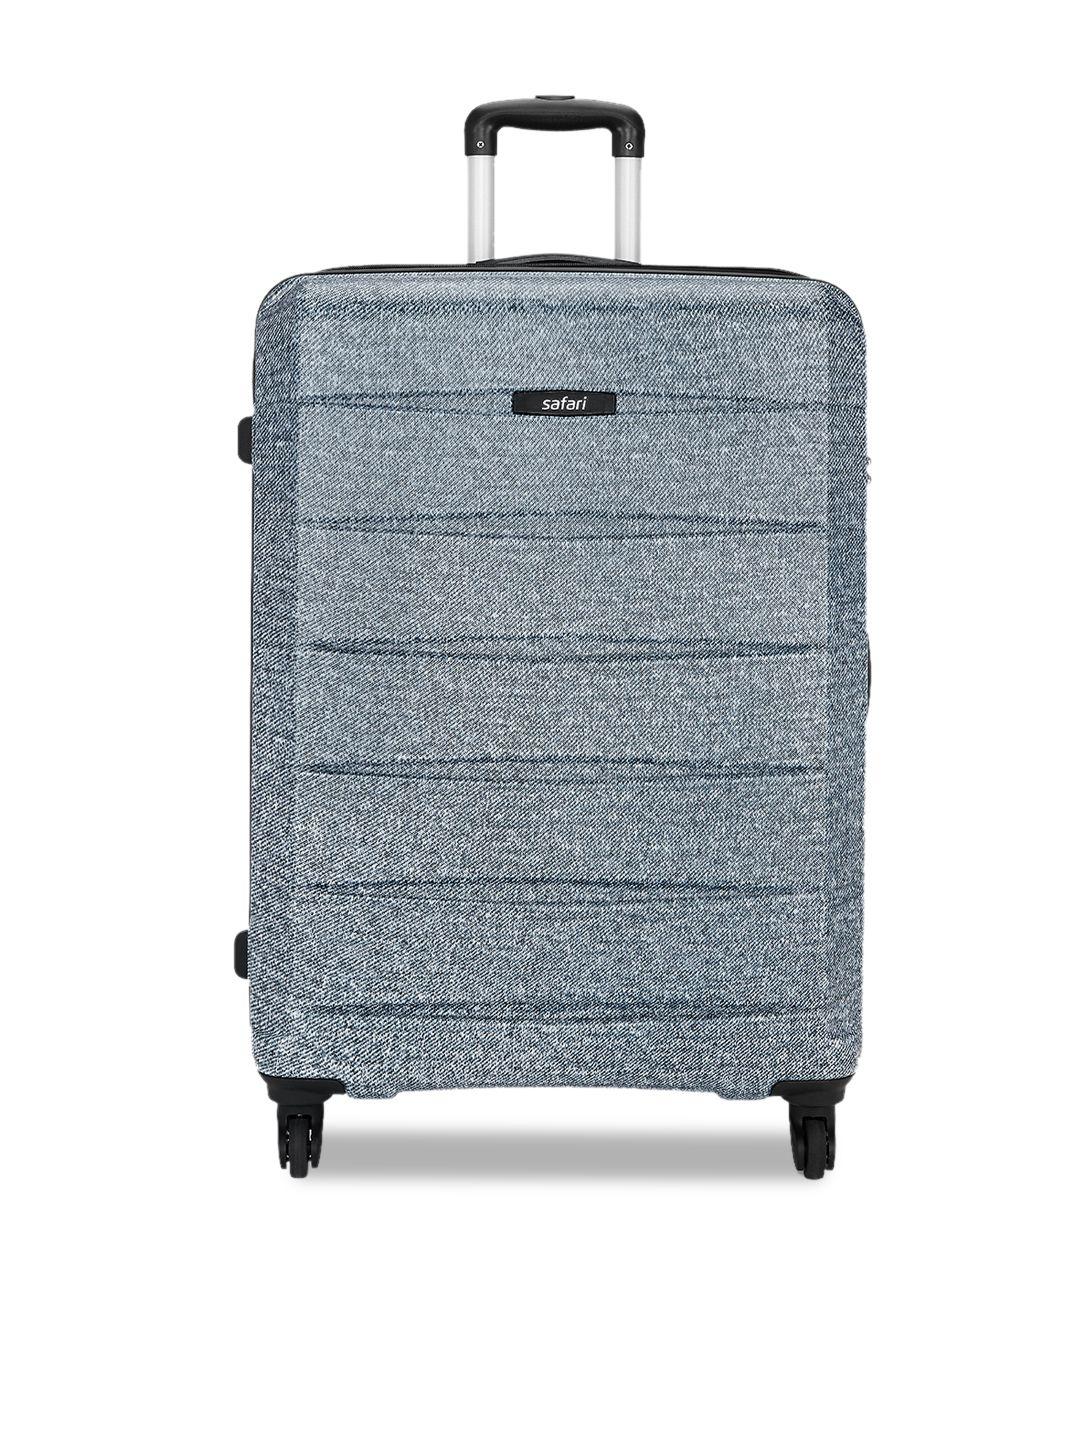 Safari Textured Large Hard-Sided Trolley Suitcase 123 L